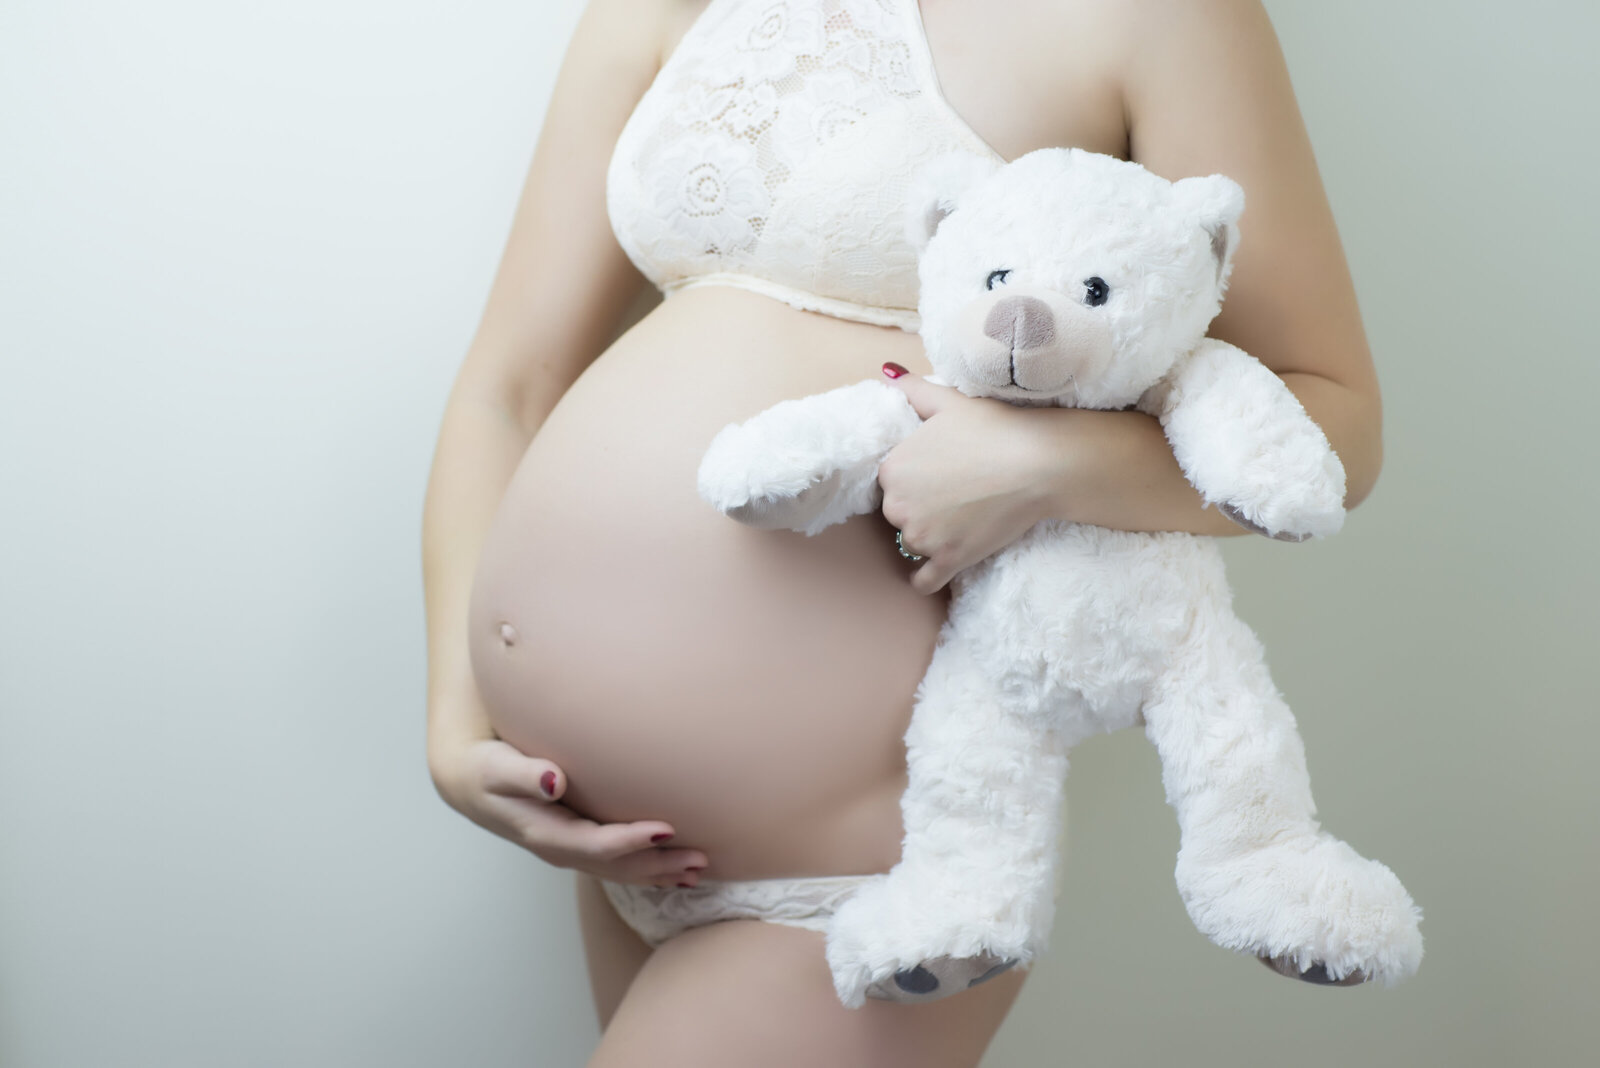 Pregnant woman maternity photo with belly and teddy bear